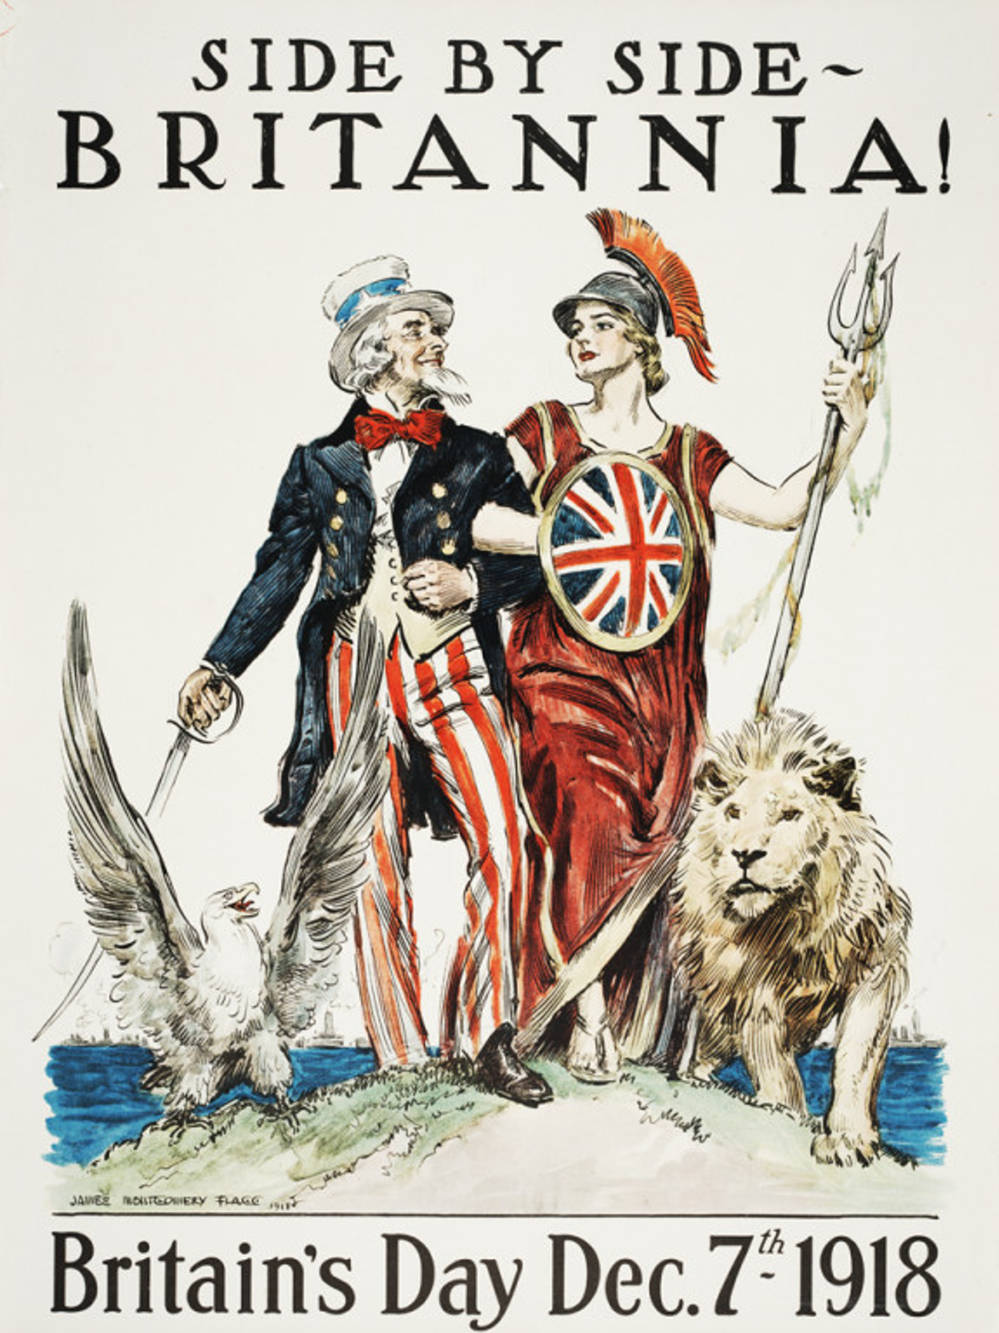 Picture of Britannia side by side with Uncle Sam, a political cartoon.